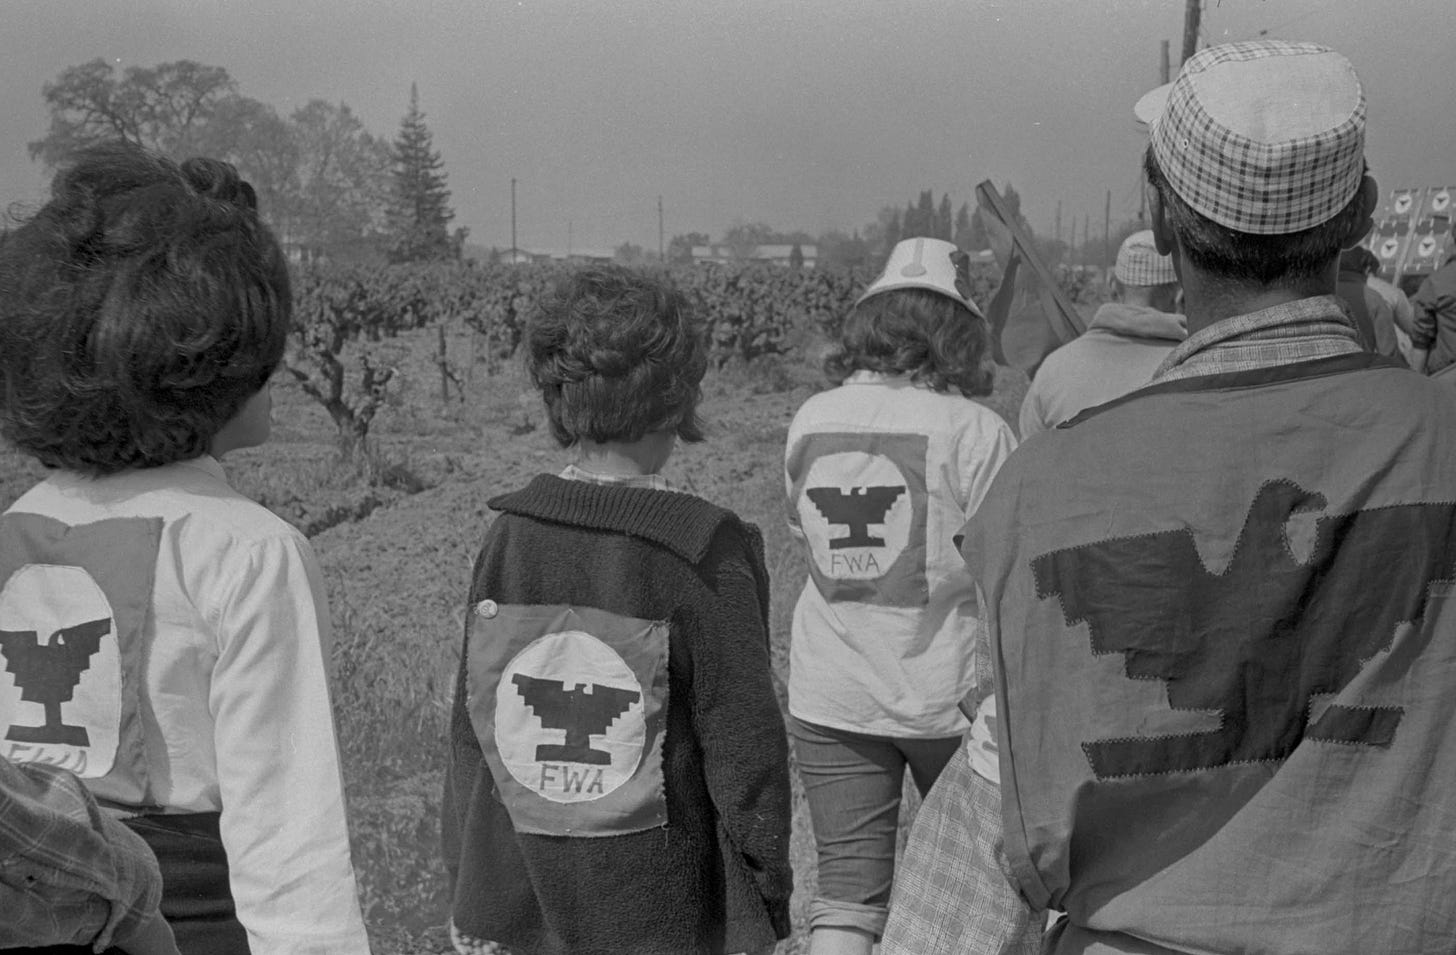 A group of marchers seen from behind wearing Thunderbird shirts during the march to Sacramento in 1966. The shirts say FWA, for Farm Workers Association. Photo by John Kouns © Tom and Ethel Bradley Center